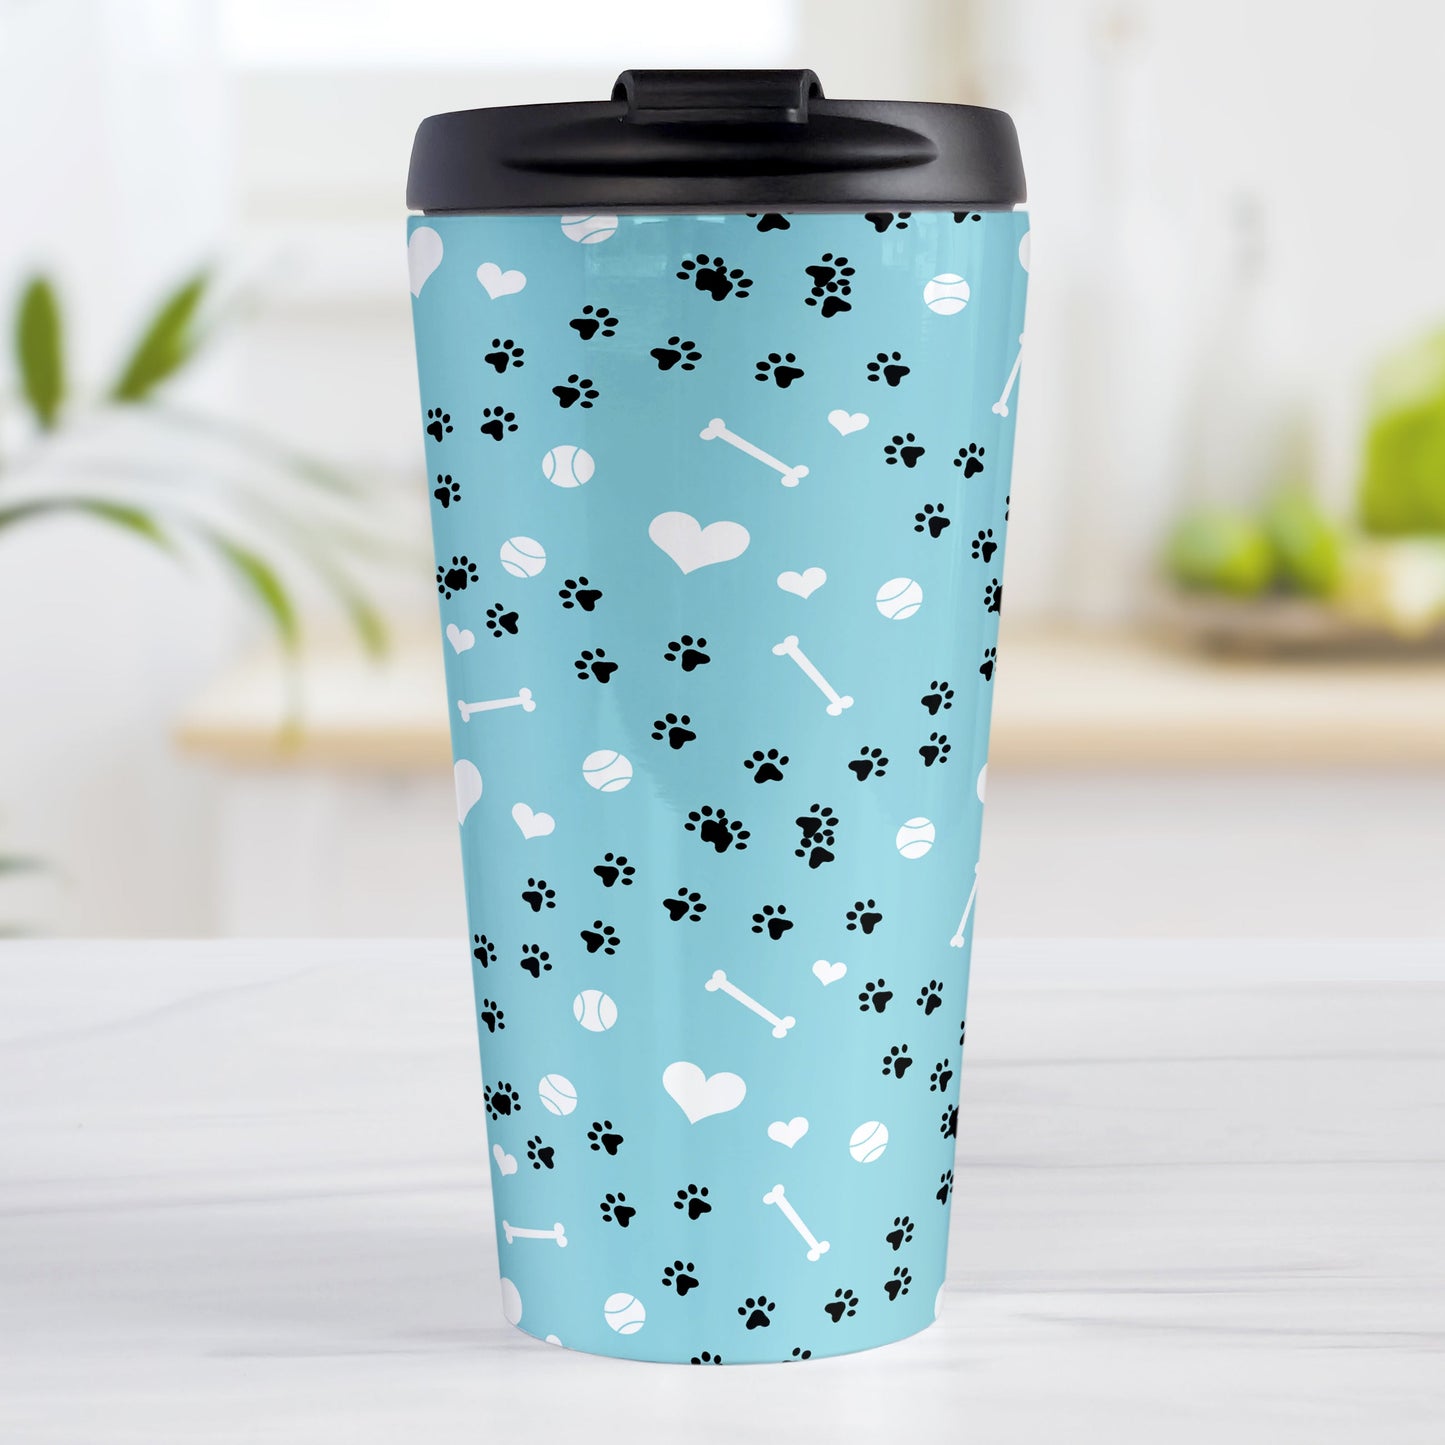 Puppy Run Blue Dog Travel Mug (15oz) at Amy's Coffee Mugs. A stainless steel travel mug designed with a pattern of chaotic tracks of puppy paw prints running around the mug with white dog bones, balls, and hearts over a light blue background. This mug is perfect for people who love the chaotic play of puppies, love dogs, and like blue travel mugs. 